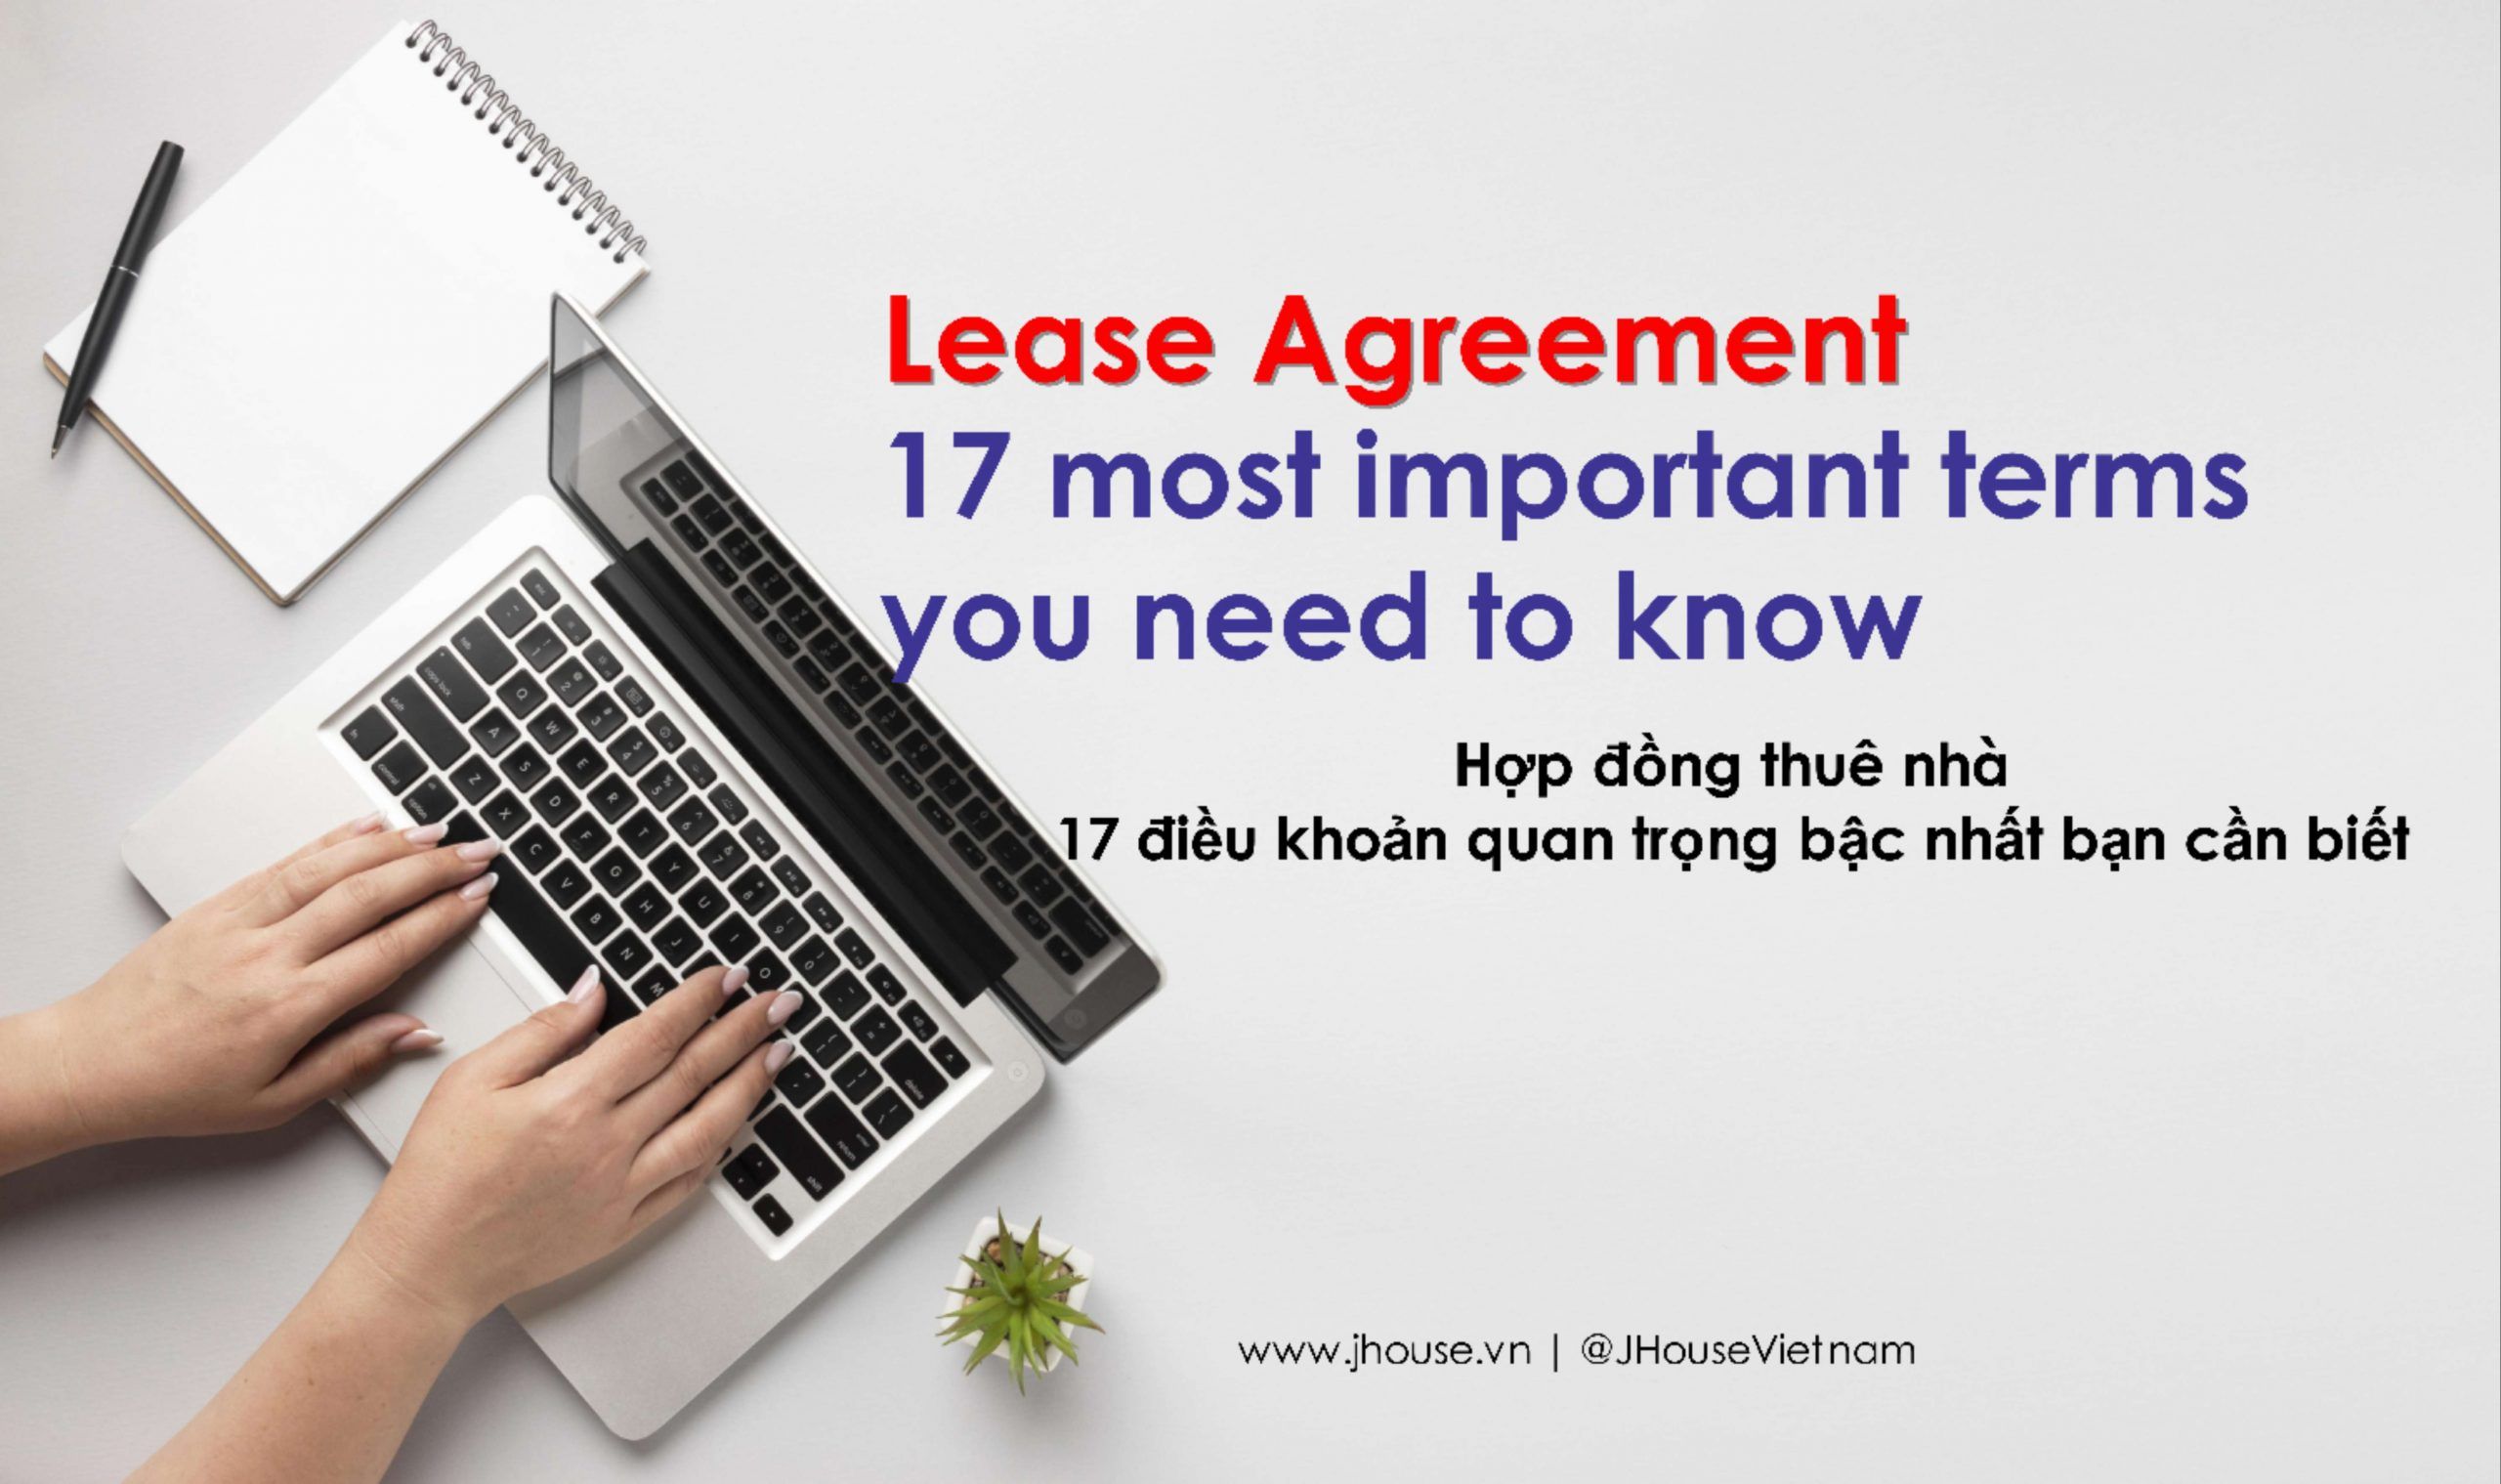 Lease agreement 17 most important terms you need to know JHouse.vn scaled